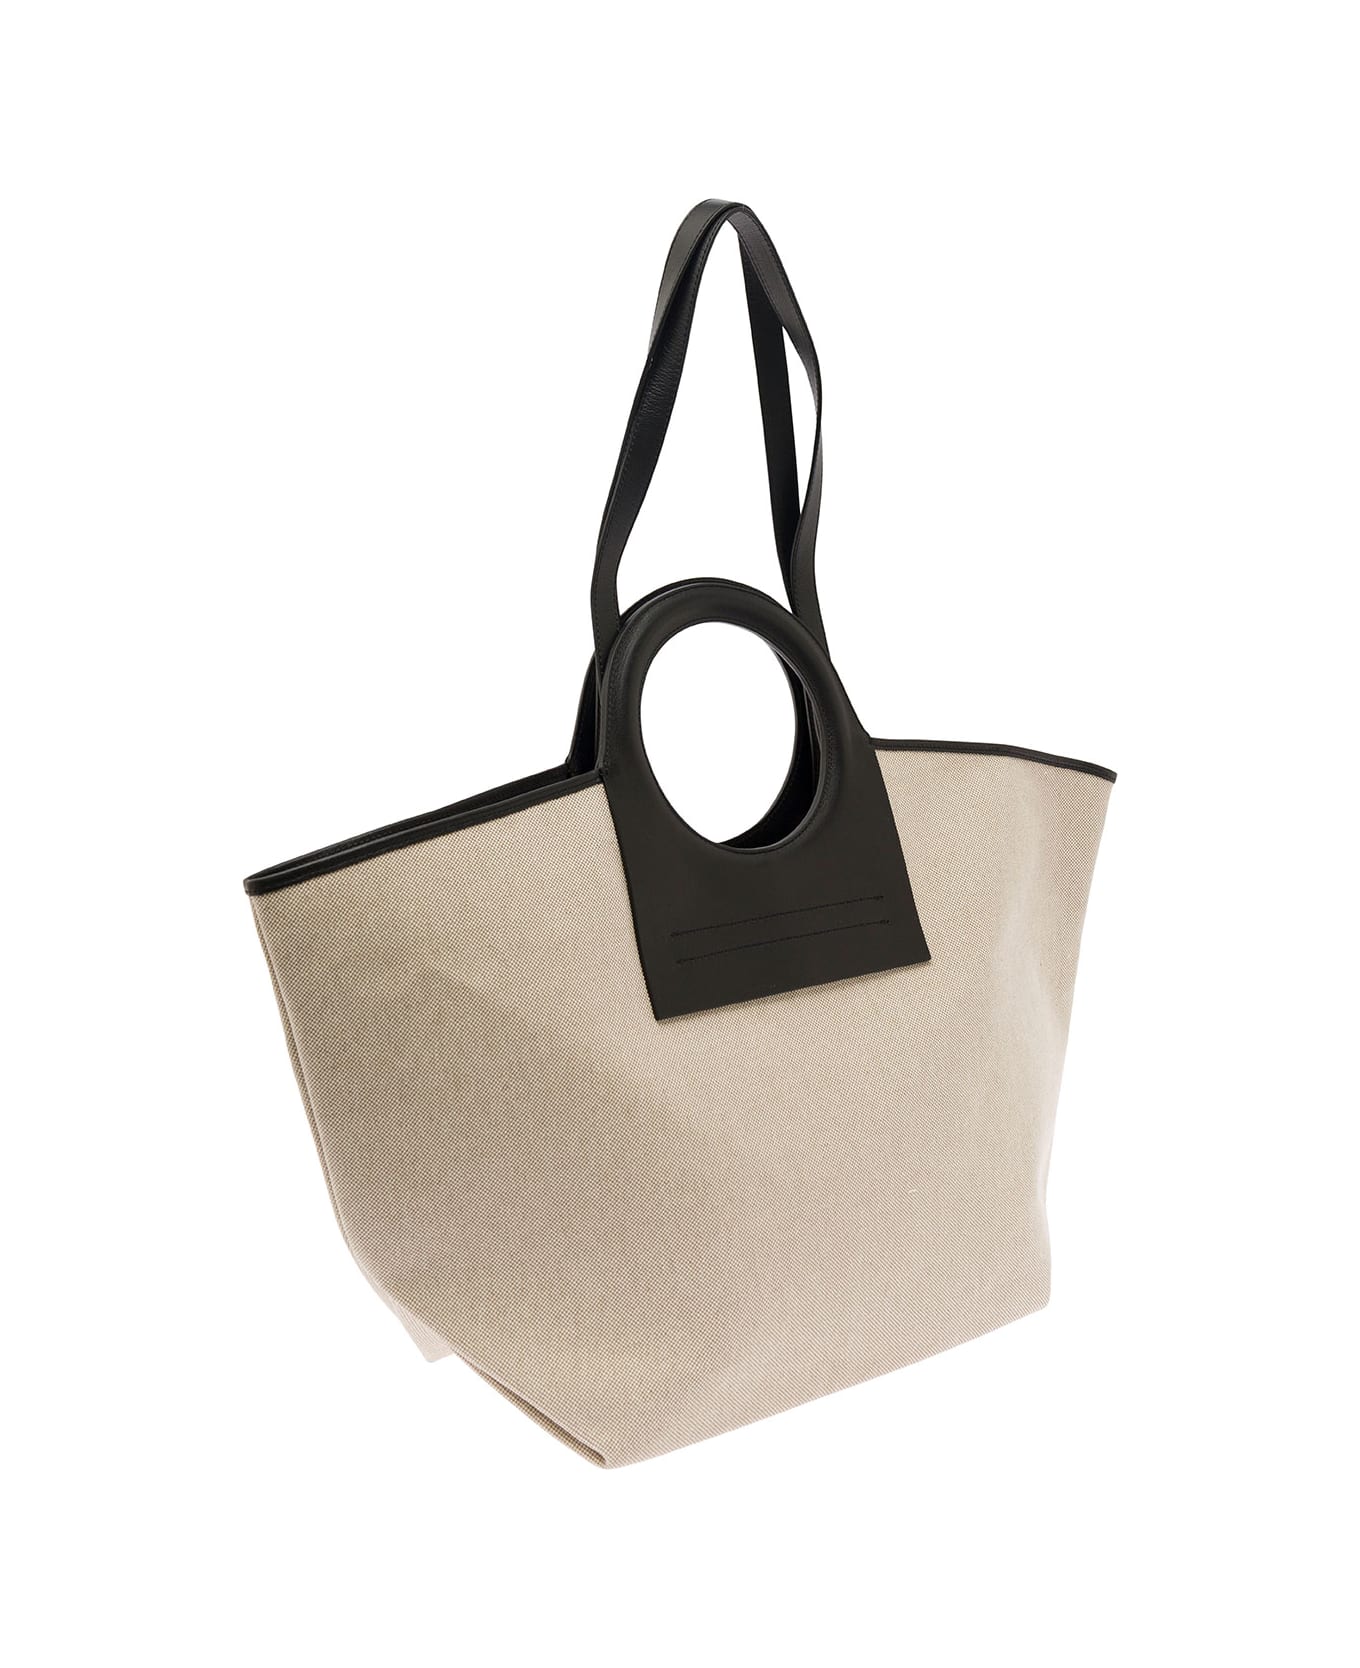 Hereu 'cala' White And Black Handbag With Leather Handles In Canvas Woman - Beige